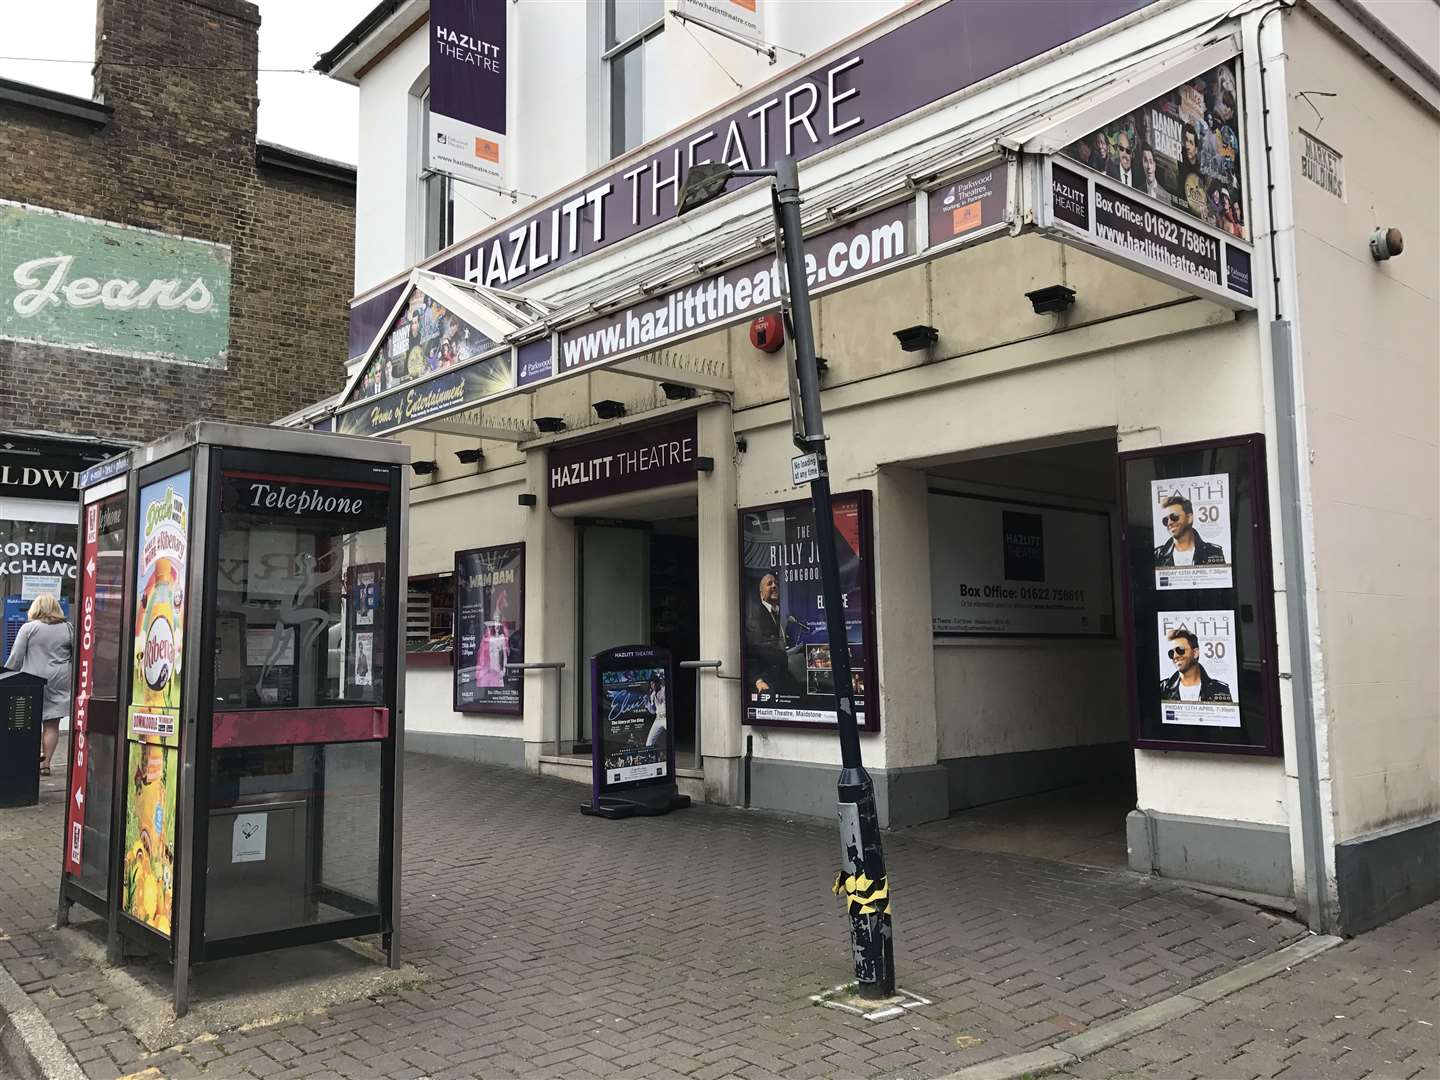 Auditions have previously been held at the Hazlitt Theatre